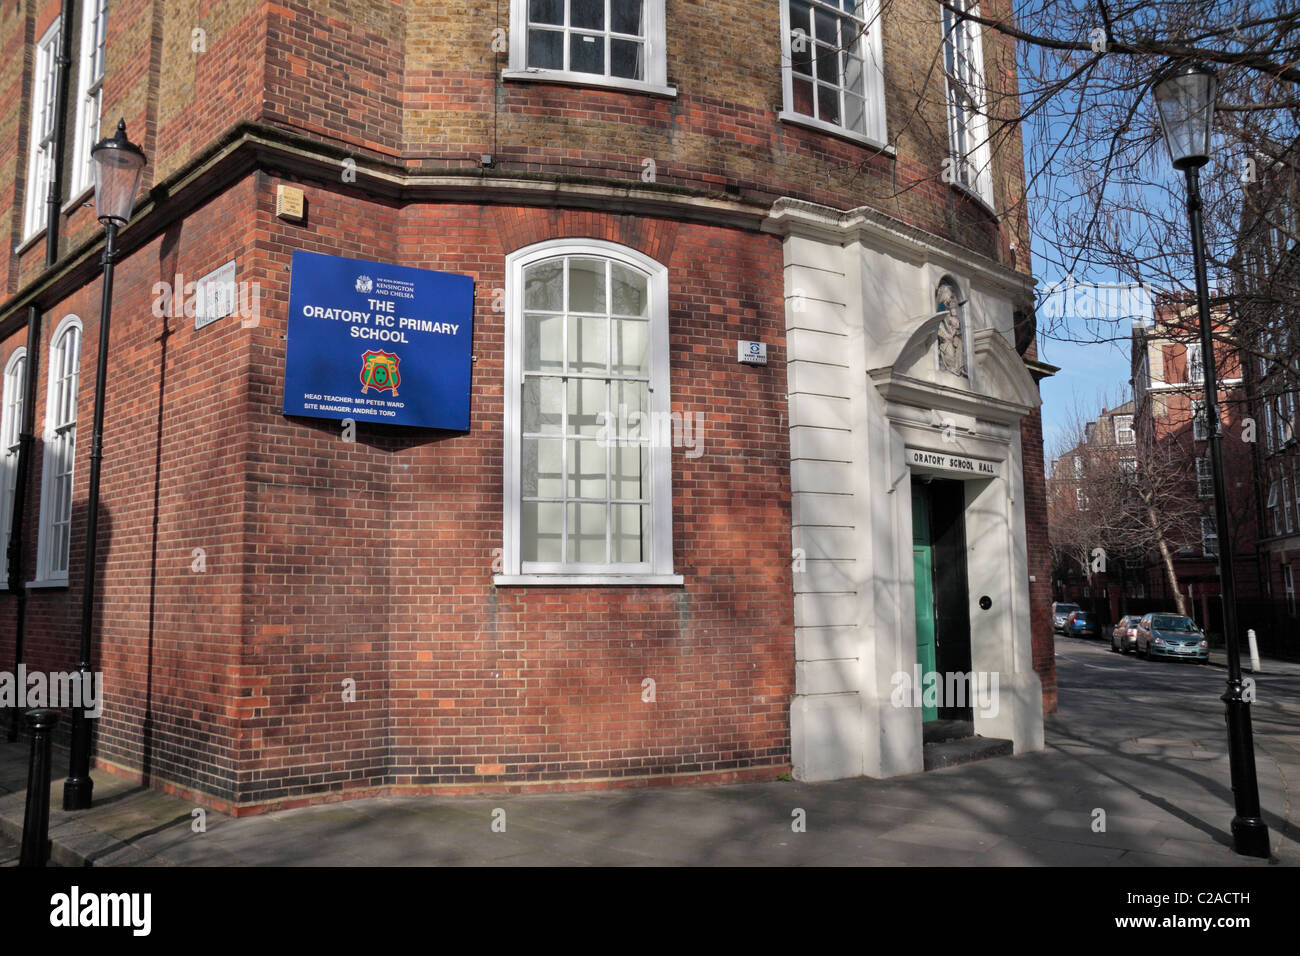 The Oratory RC Primary School in the Royal Borough of Kensington and Chelsea, London, UK. Stock Photo